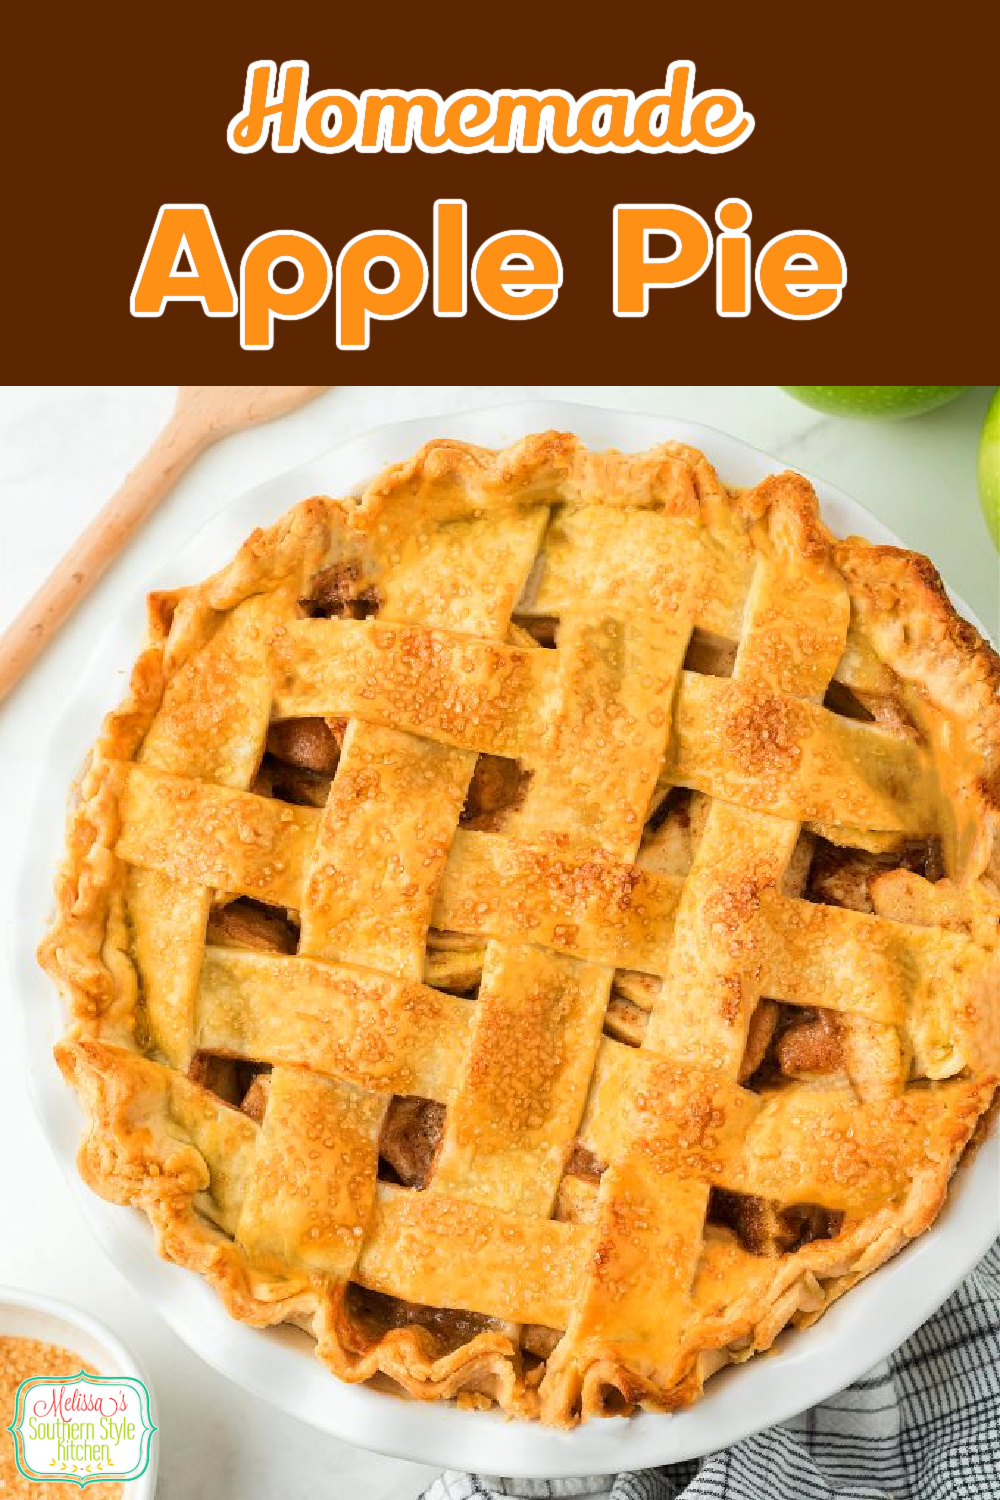 This lattice topped Apple Pie Recipe can be served warm with vanilla ice cream, at room temperature or chilled with a dollop of whipped cream #applepierecipe #applepie #grannysmithapples #bestapplepie #thanksgivingpies #desserts #easyapplepie via @melissasssk